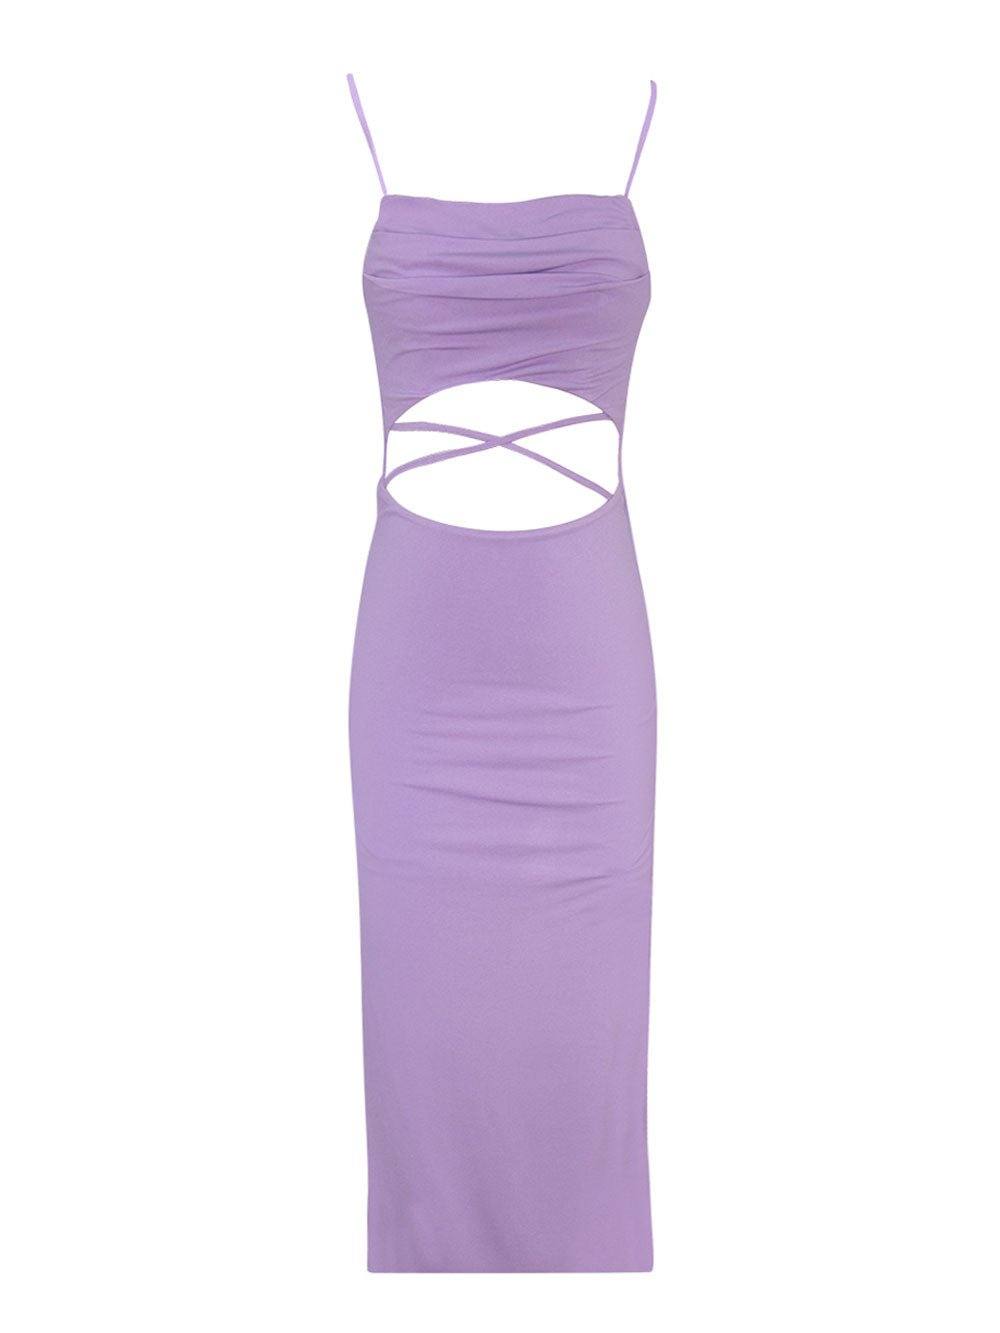 Cut Out Backless Maxi Dress - Lilac Purple - OCEAN MYSTERY